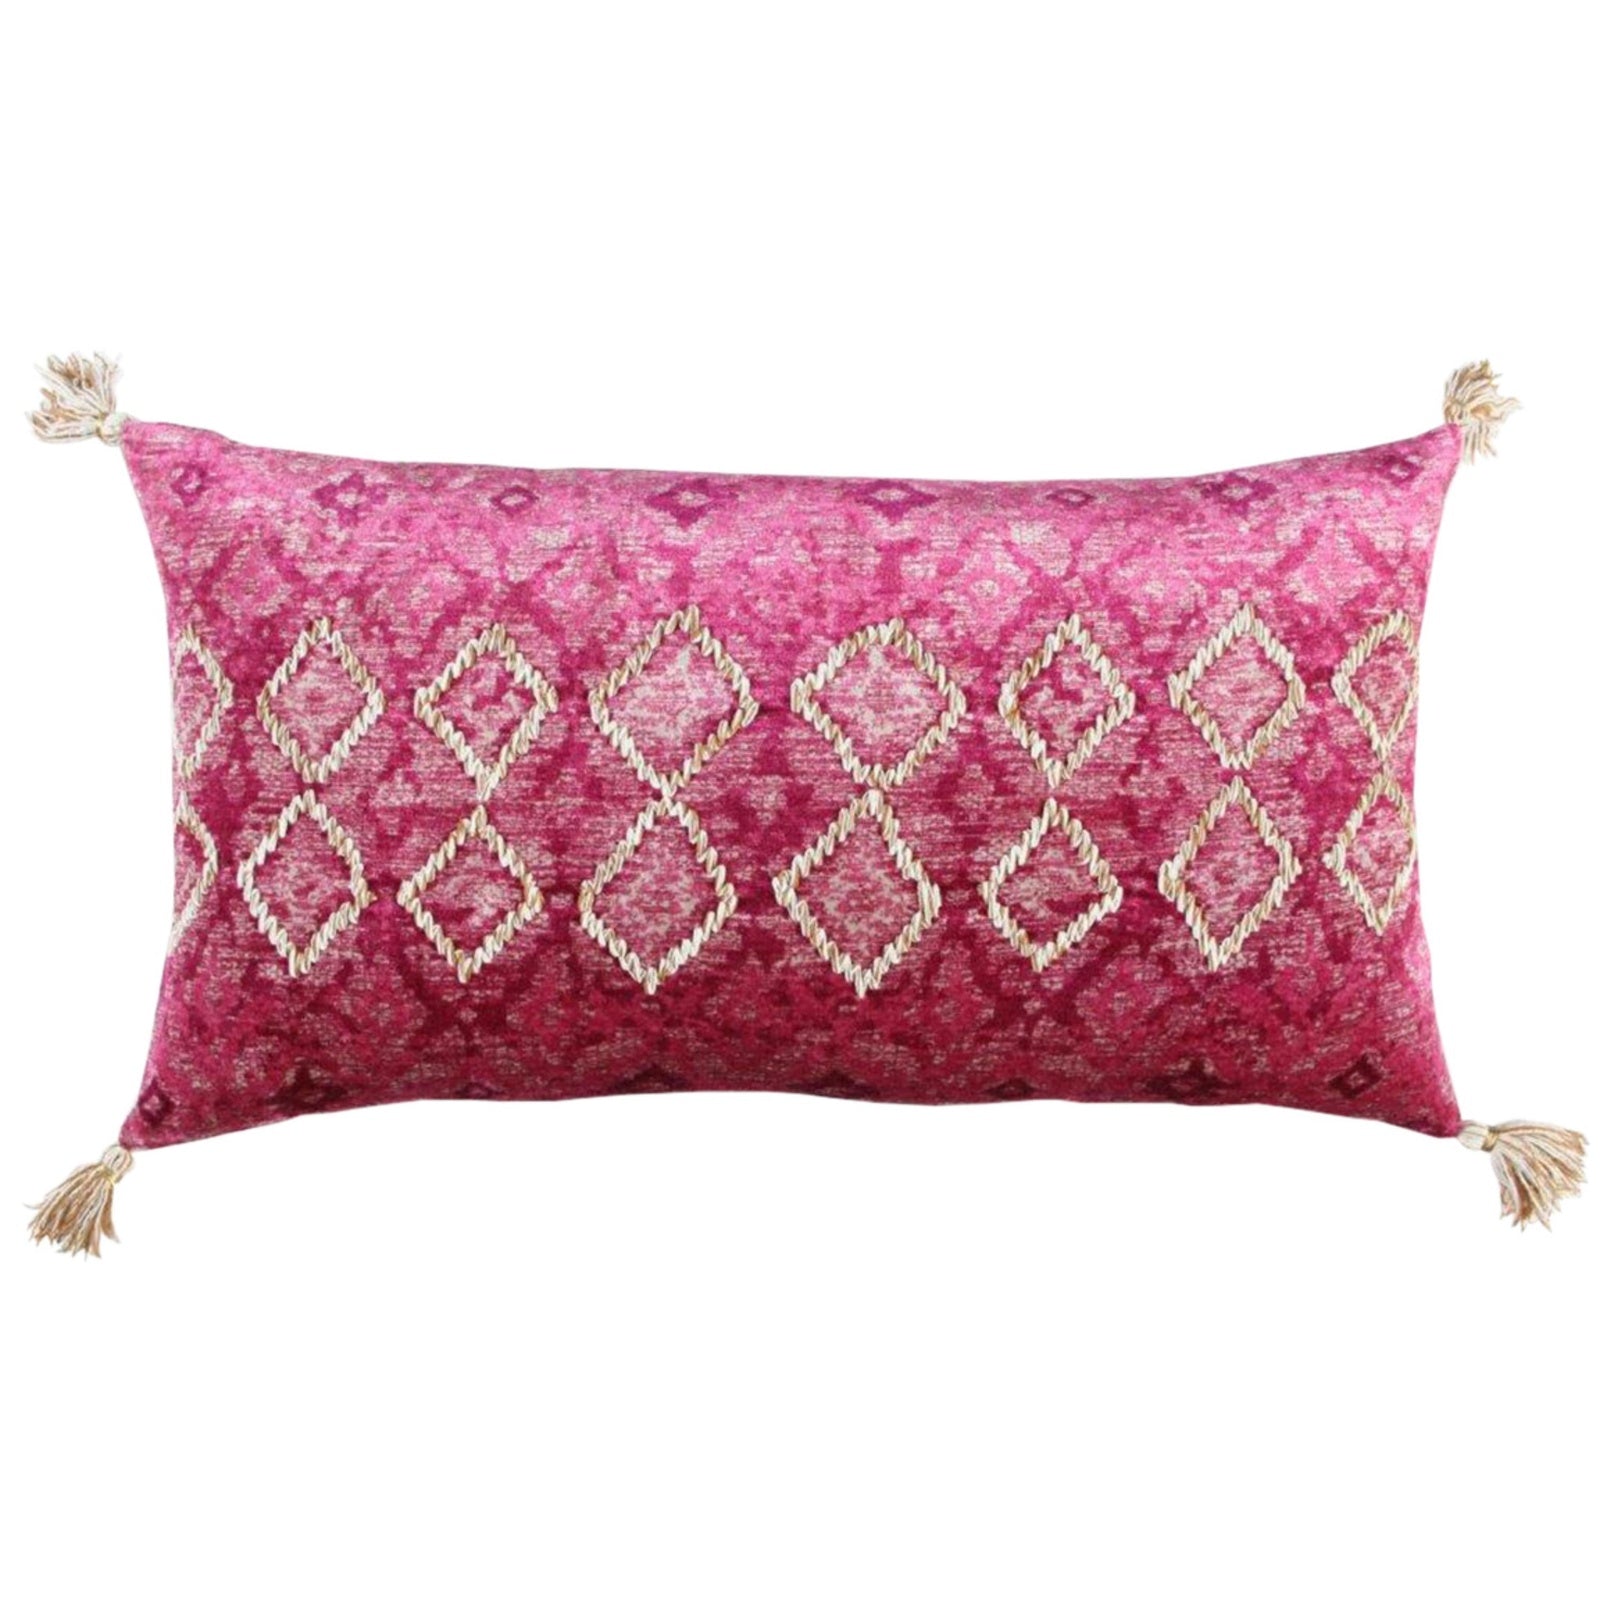 Diamond Printed And Embroidered Cotton Decorative Throw Pillow - Decorative Pillows